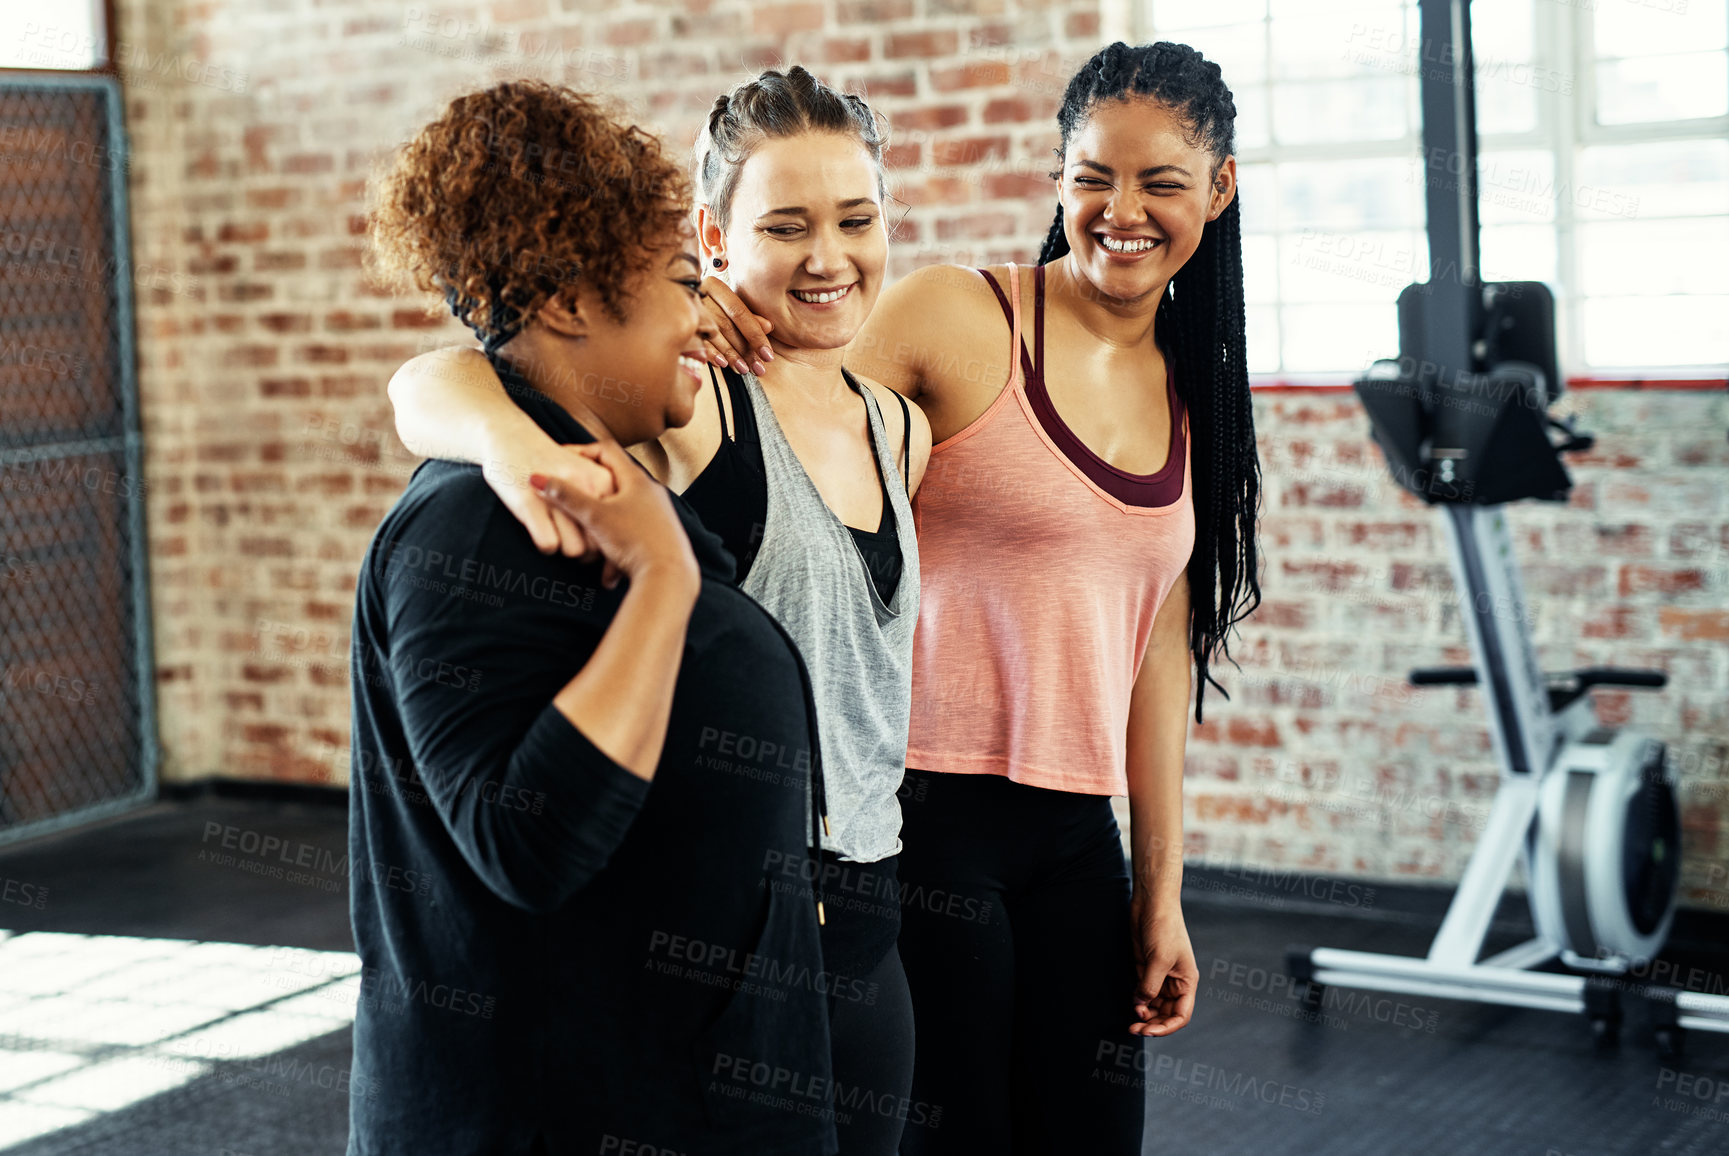 Buy stock photo Shot of three cheerful young women having a conversation while holding each other before a workout session in a gym